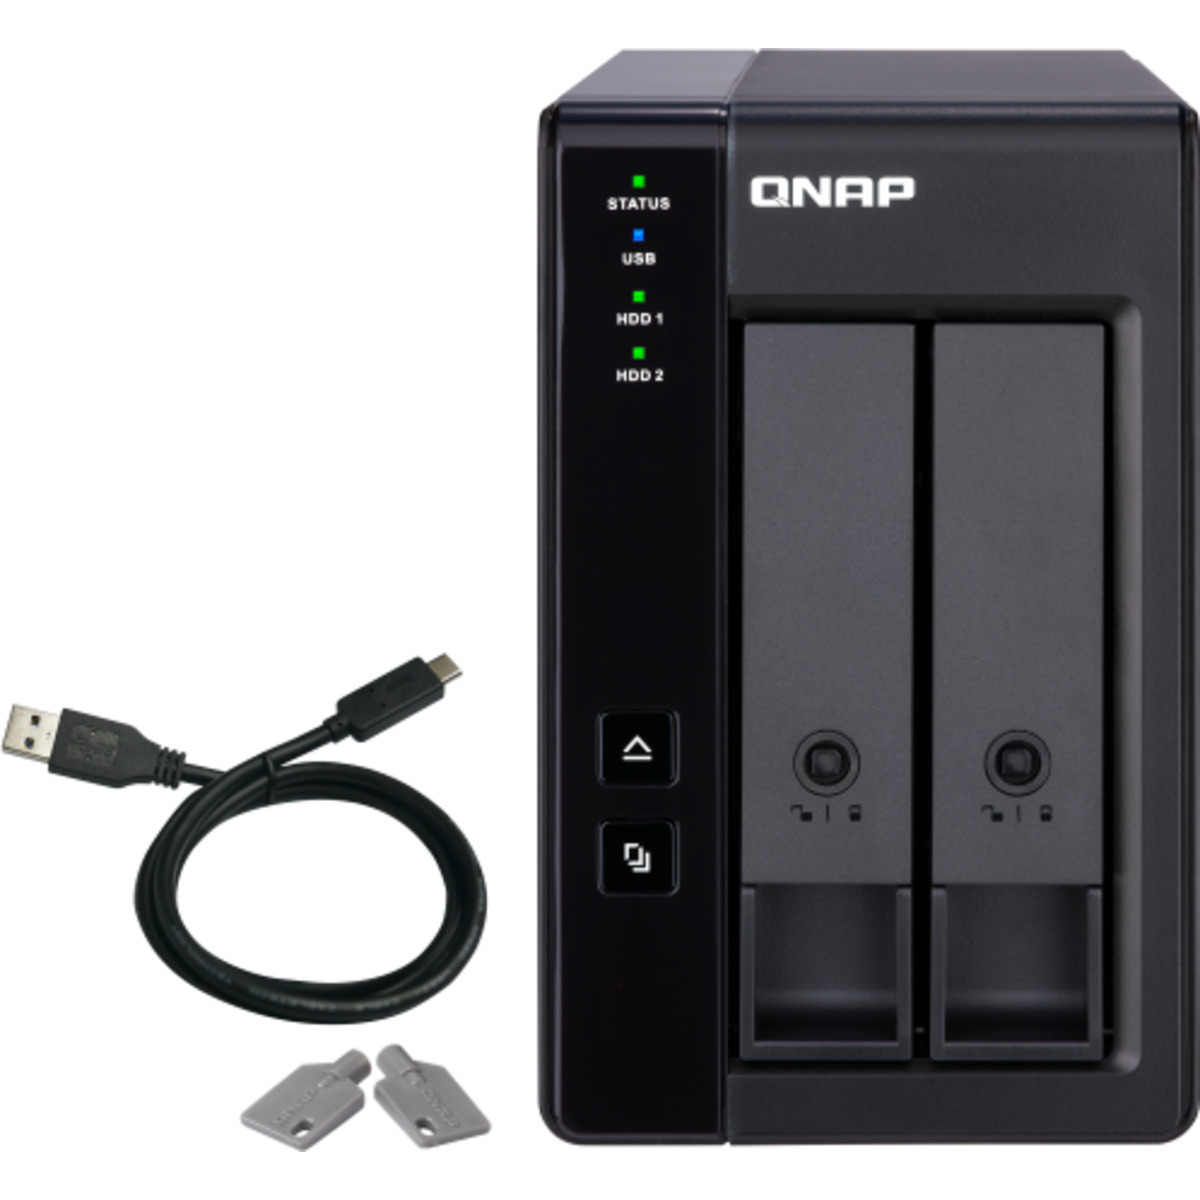 QNAP TR-002 External Expansion Drive 1tb 2-Bay Desktop Multimedia / Power User / Business Expansion Enclosure 1x1tb Western Digital Red SA500 WDS100T1R0A 2.5 560/530MB/s SATA 6Gb/s SSD NAS Class Drives Installed - Burn-In Tested TR-002 External Expansion Drive